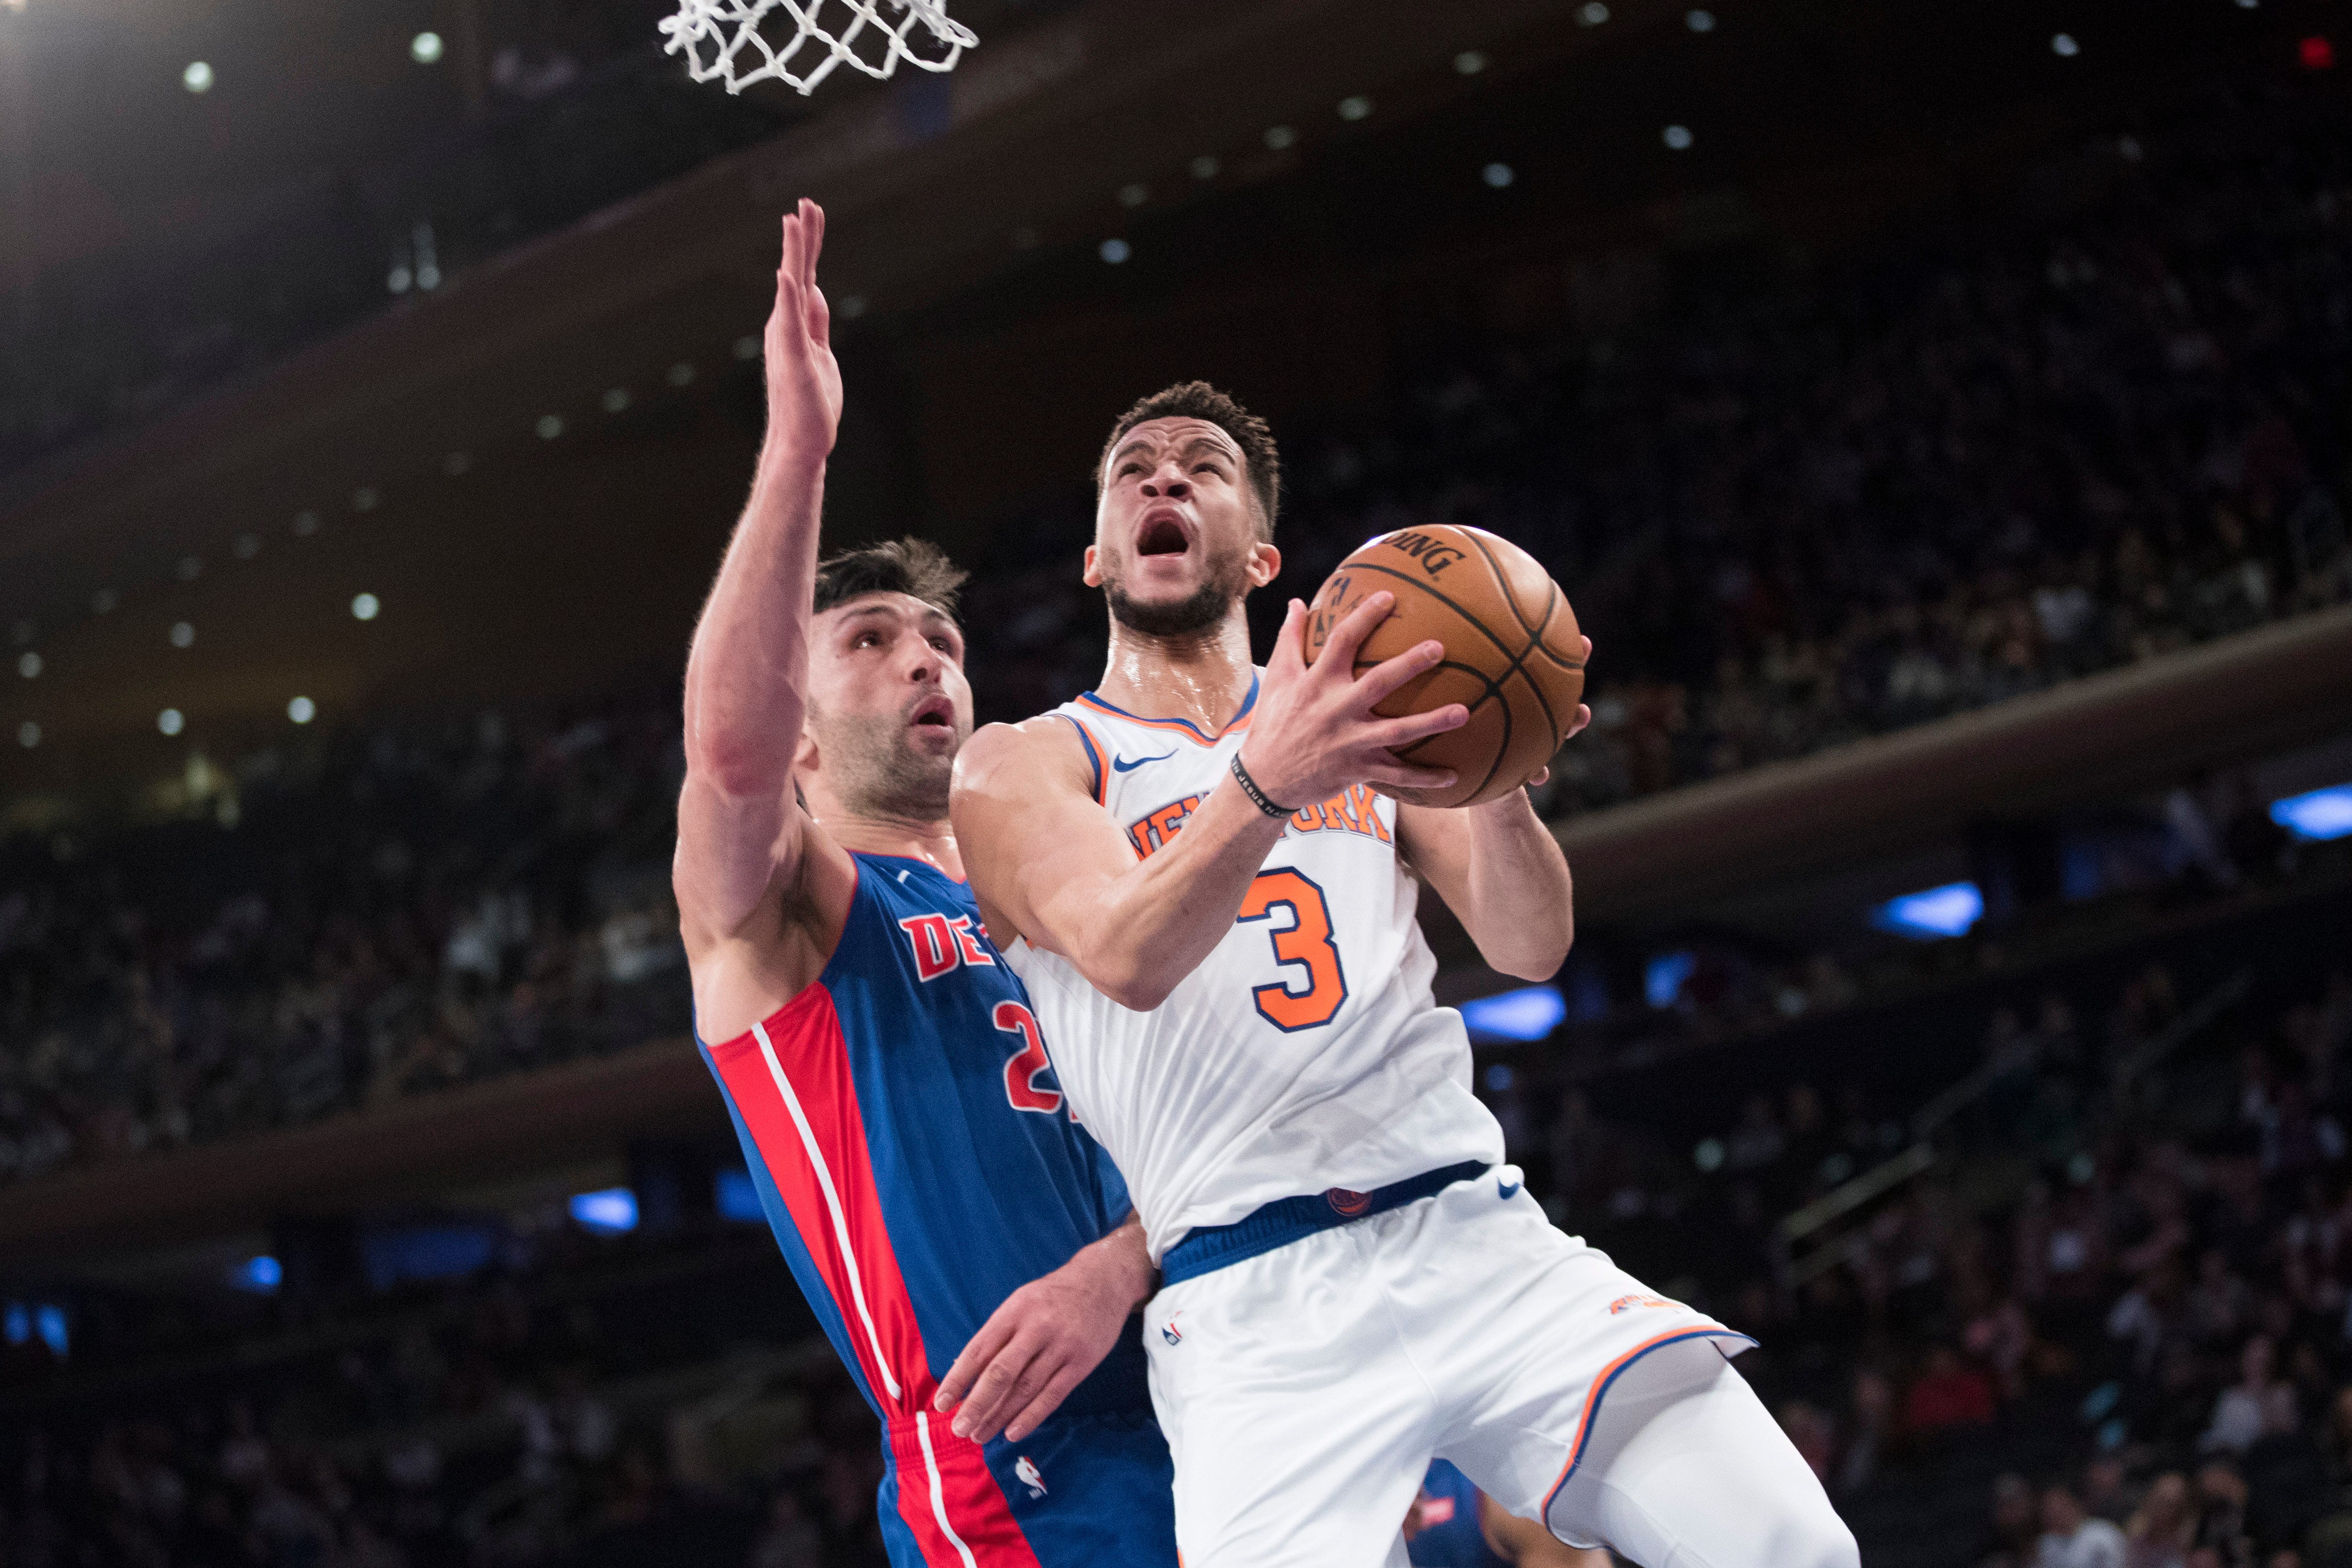 New York Knicks guard Billy Garrett Jr. (3) goes to the basket against Detroit Pistons center Zaza Pachulia during the second half.